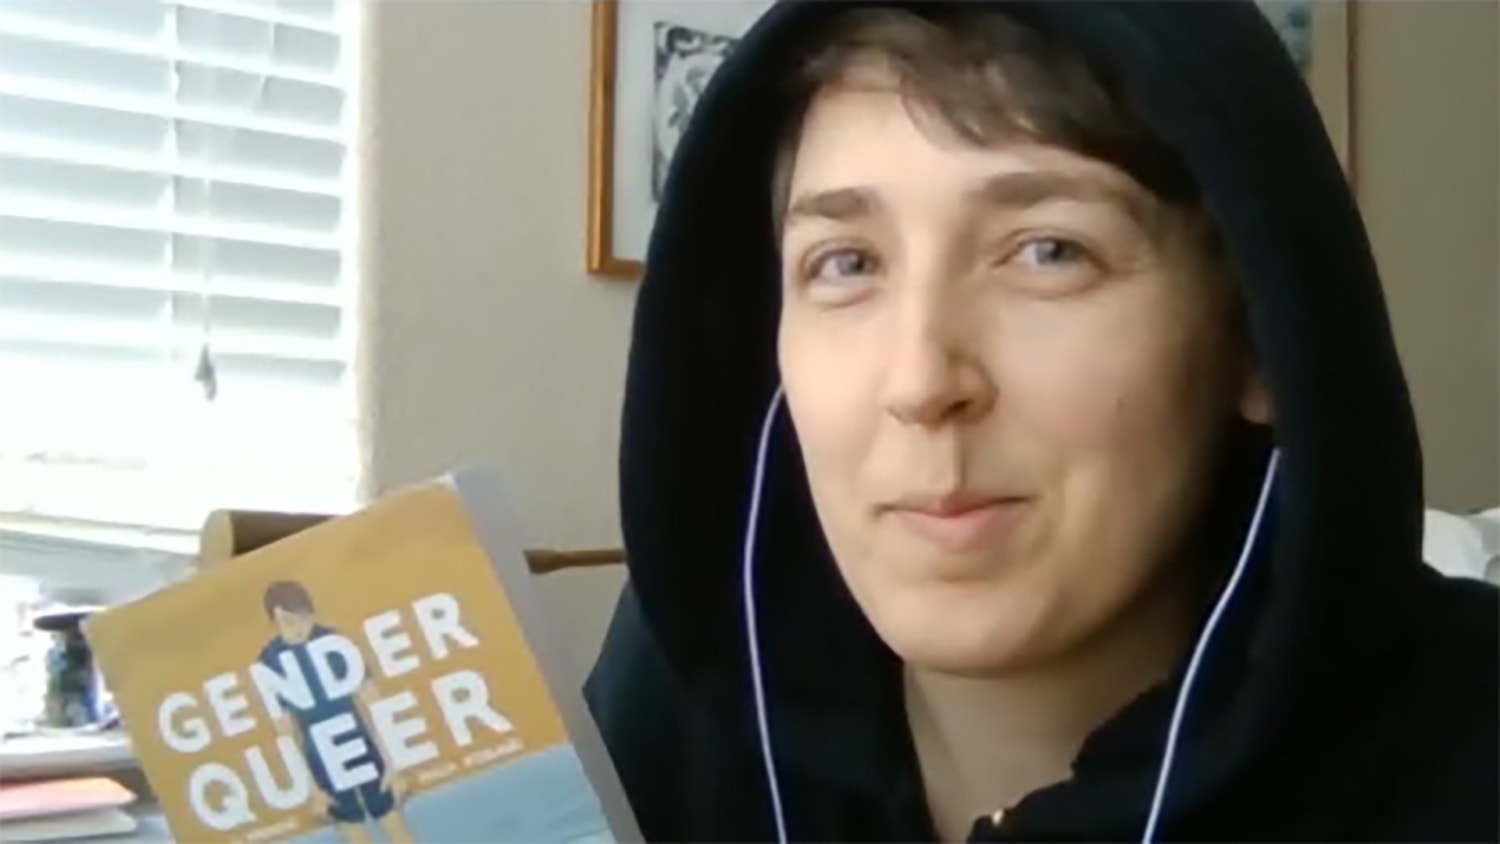 Author of 'Gender Queer,' one of most-banned books in U.S., addresses  controversy